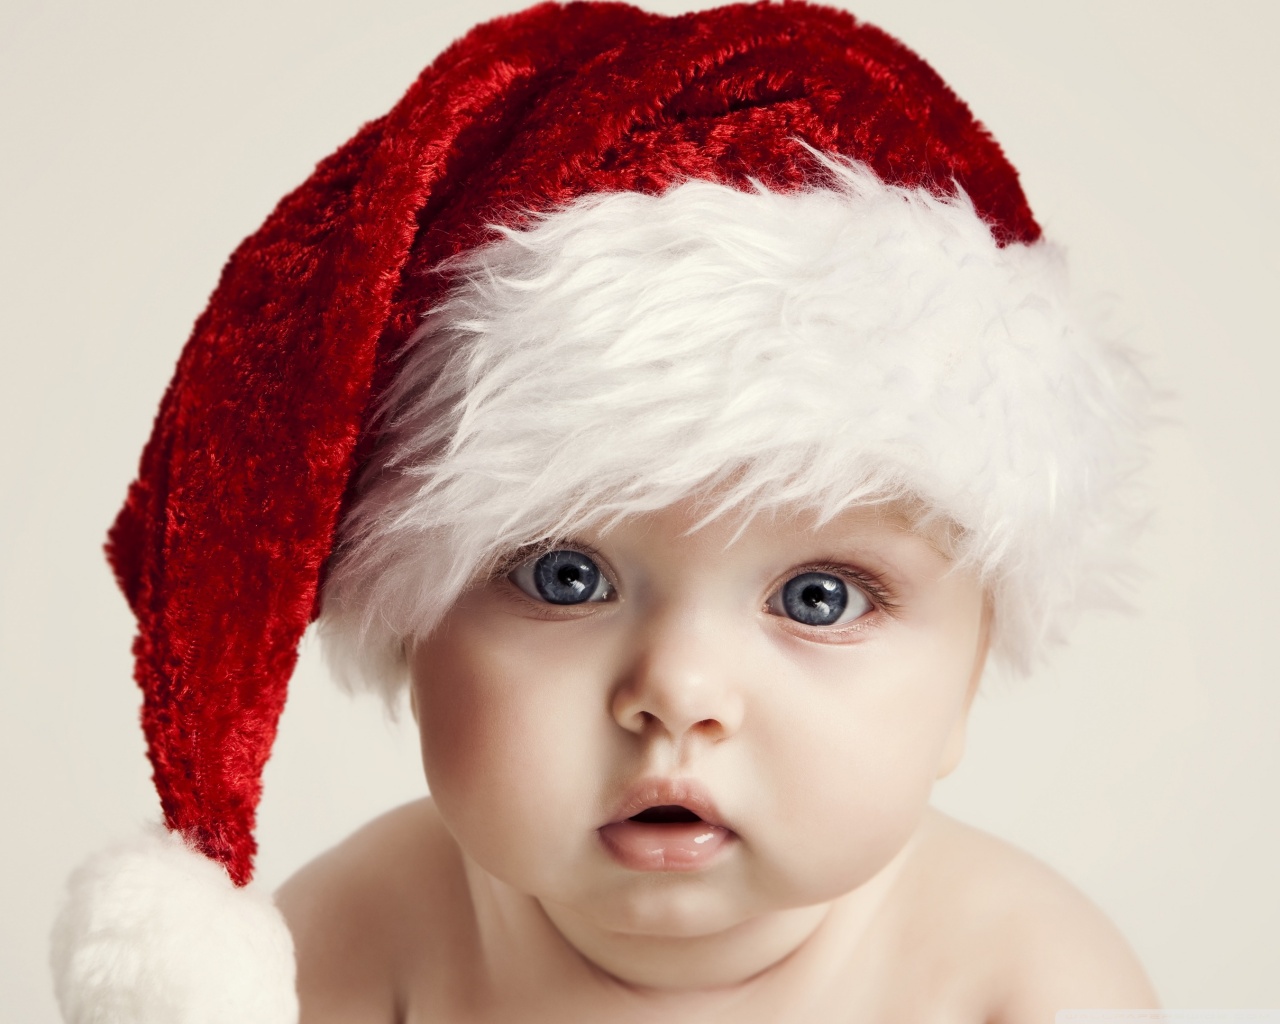 Merry Christmas Images Cute Baby - HD Wallpaper 